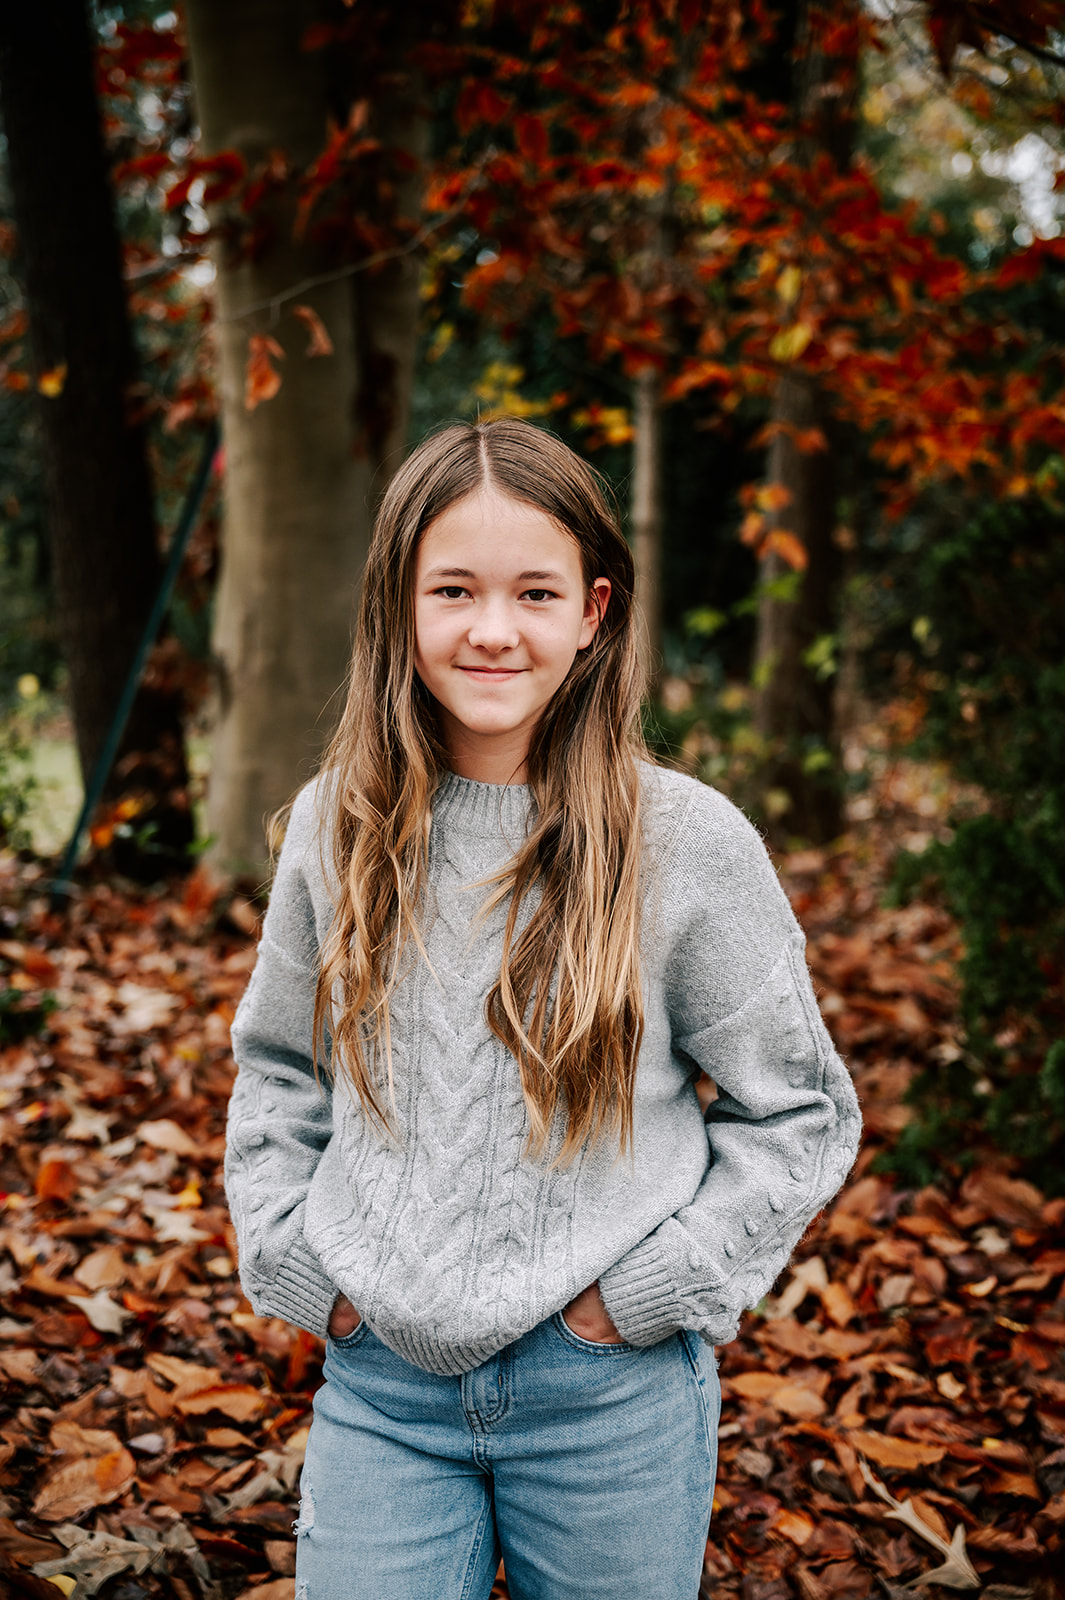 A teenage girl stands with hands in pockets and a grey sweater by a pile of fall leaves Creative Kids Pediatric Dentistry